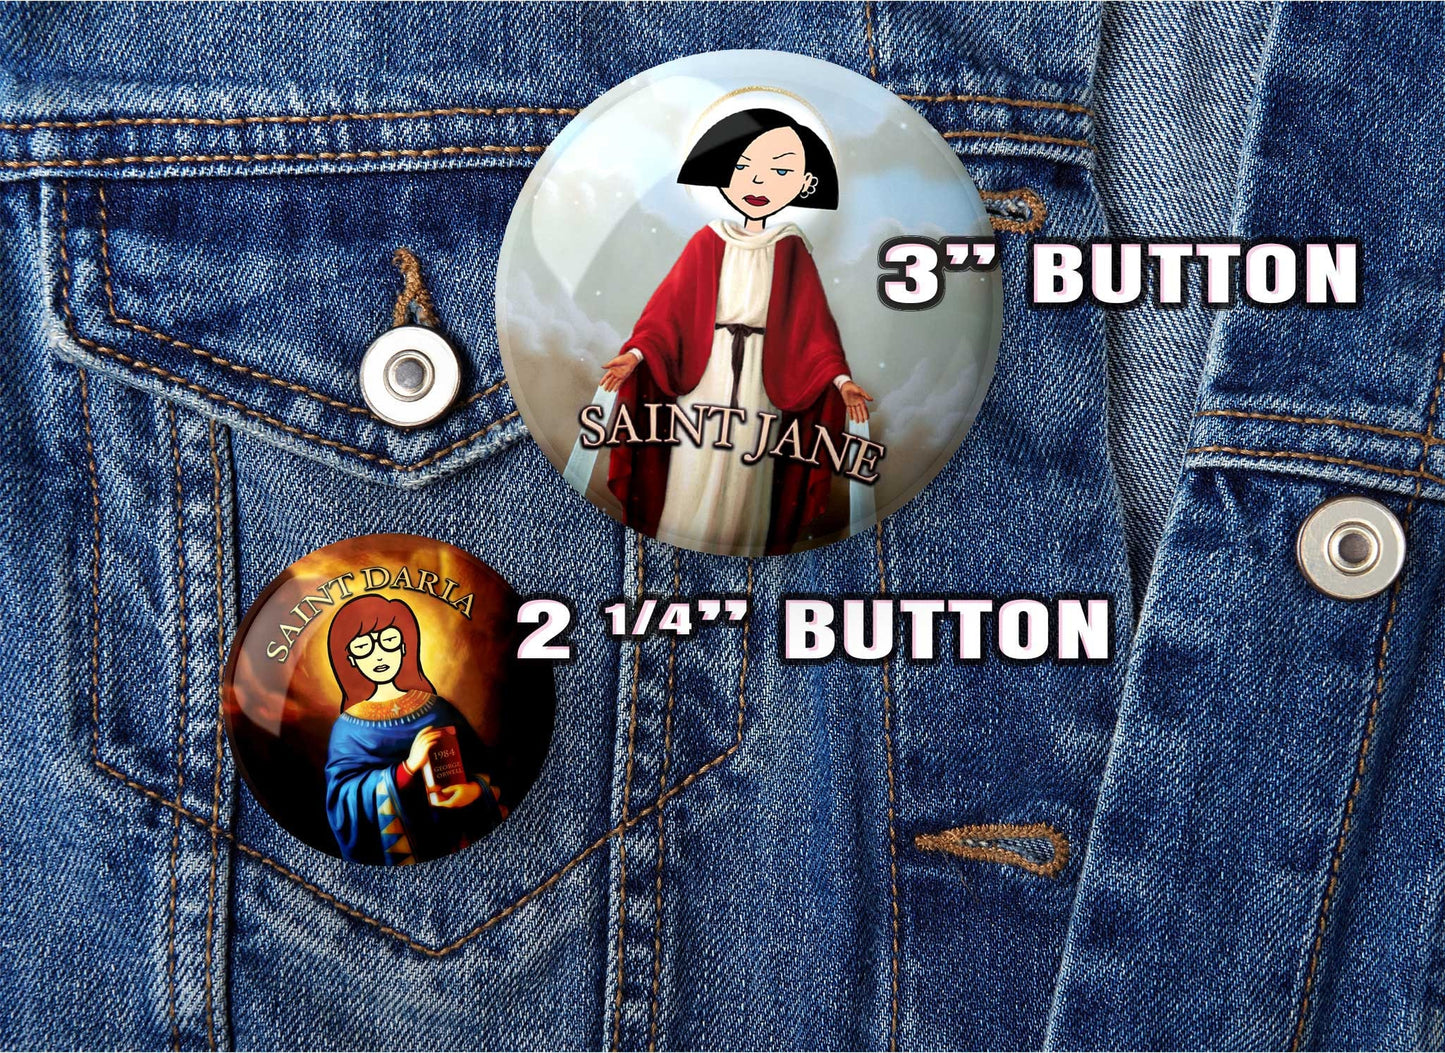 Daria  - Pocket Mirror, Magnet, and or  Pin Back Button